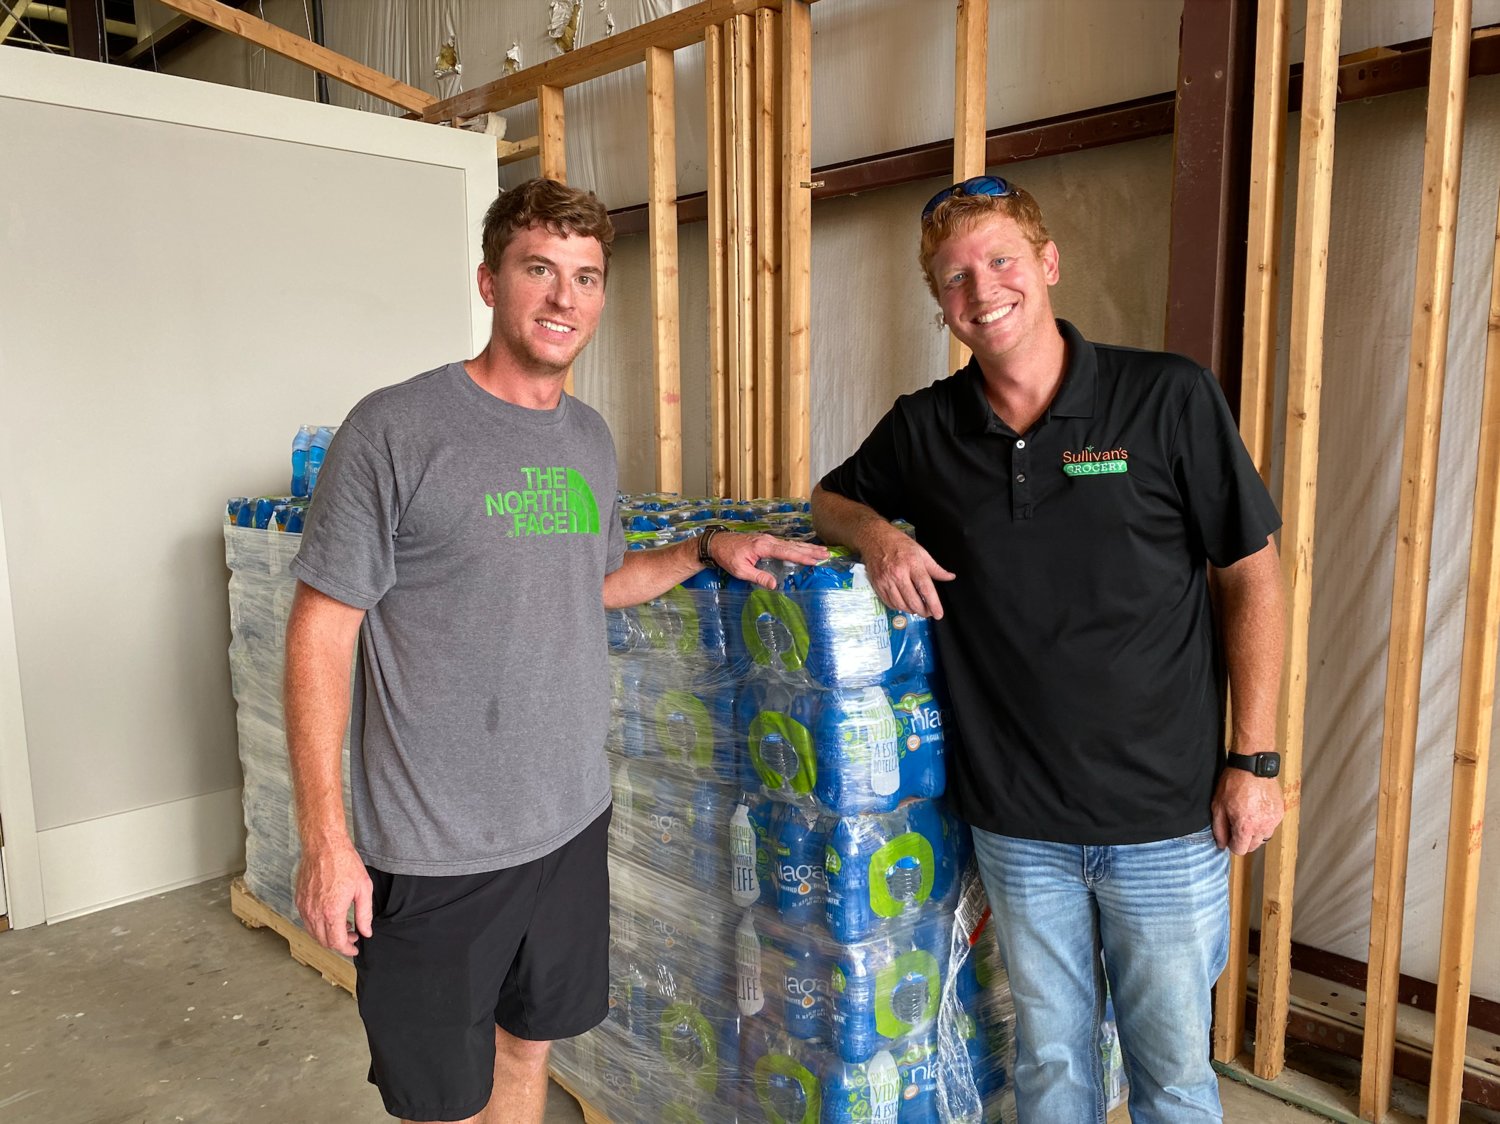 Parker Sullivan and Shawn Sullivan offload a pallet of water at Gluckstadt City Hall. The brothers, part of the newly-built Sullivan’s Grocery, are one of a number of businesses and individuals currently donating water to Jackson residents in need.